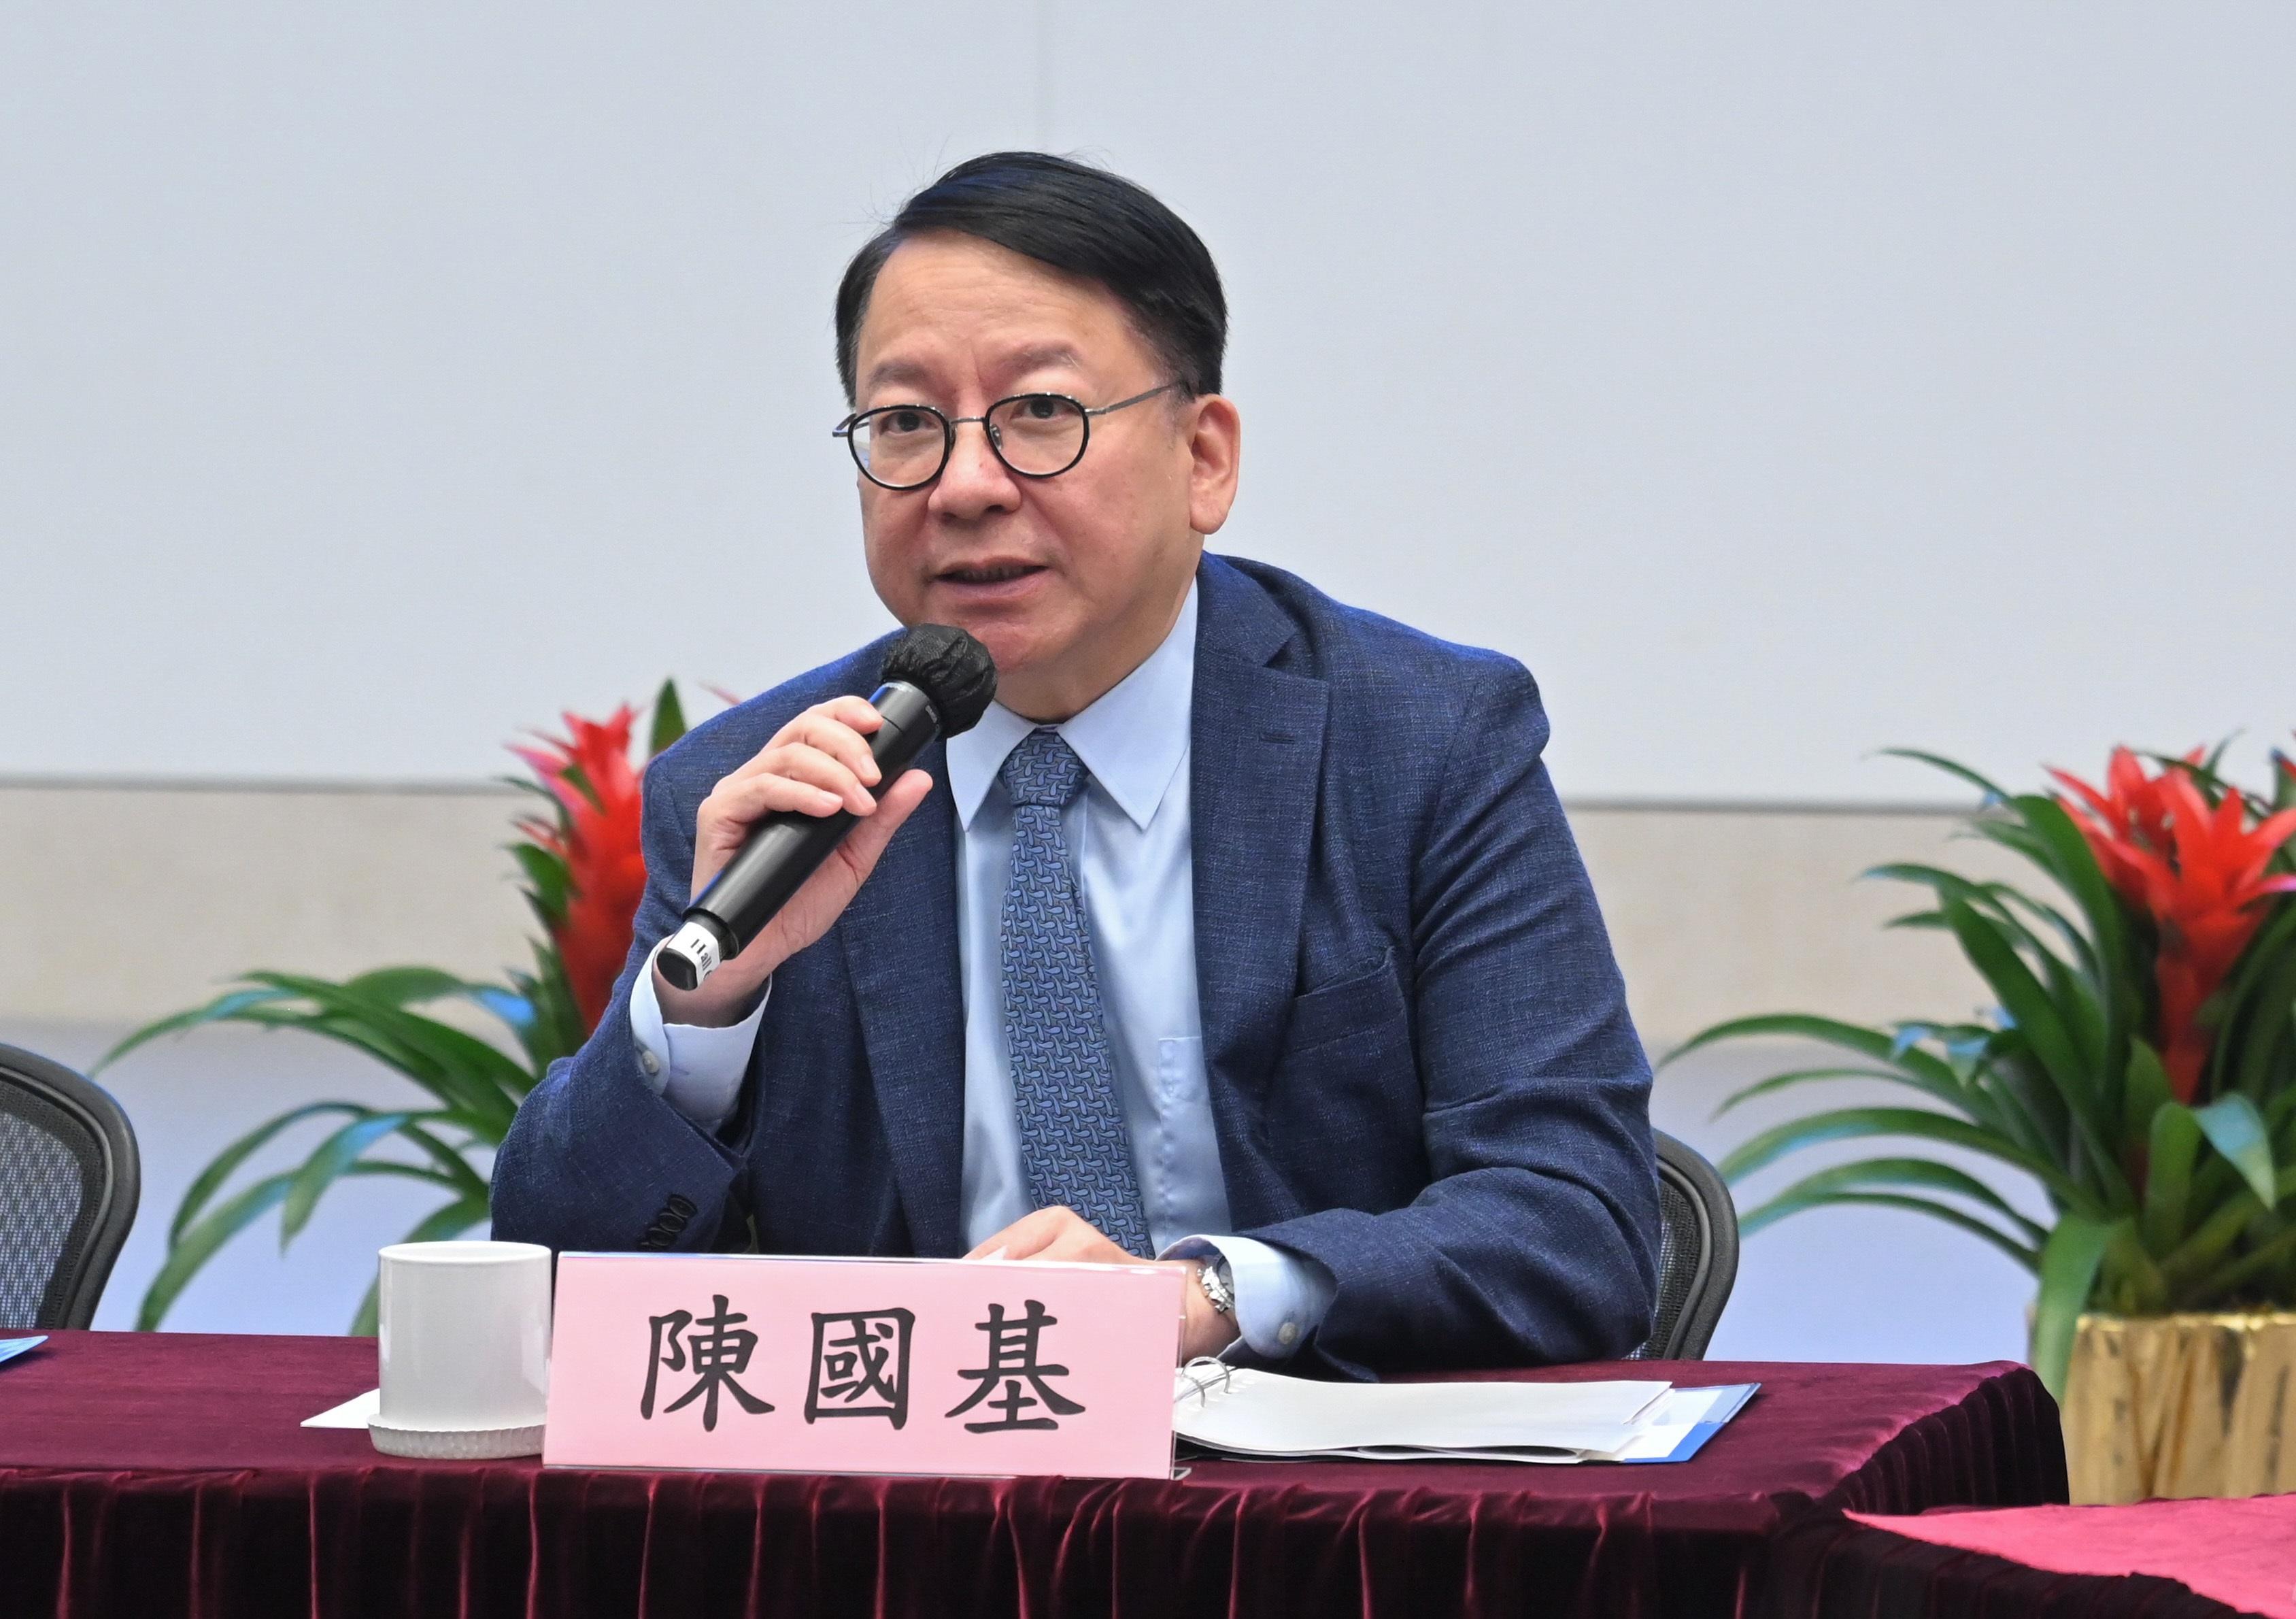 The Hong Kong Special Administrative Region Government today (March 28) held a seminar on learning and implementing the spirit of the “two sessions” at the Central Government Offices. Photo shows the Chief Secretary for Administration, Mr Chan Kwok-ki, sharing his views.